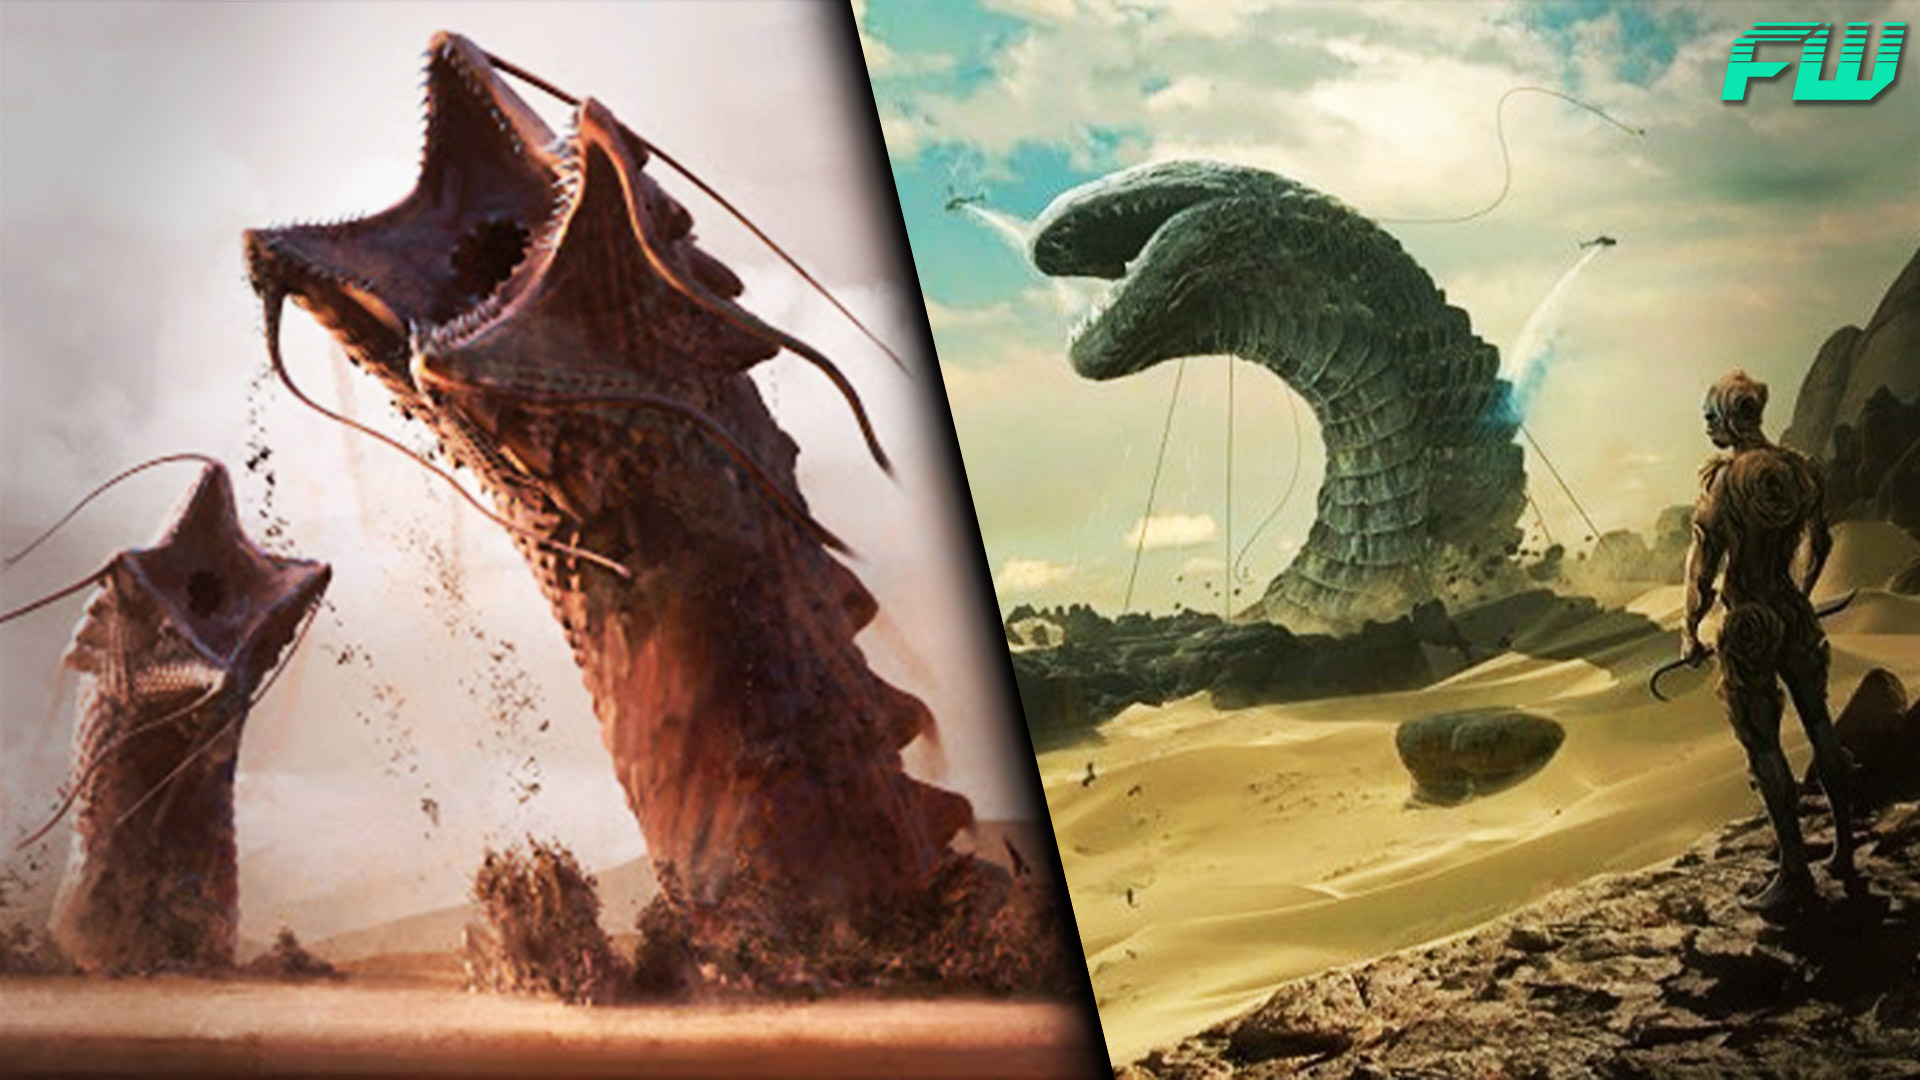 A native life-form of the Planet of Arrakis, the Sandworm of Dune is a giga...